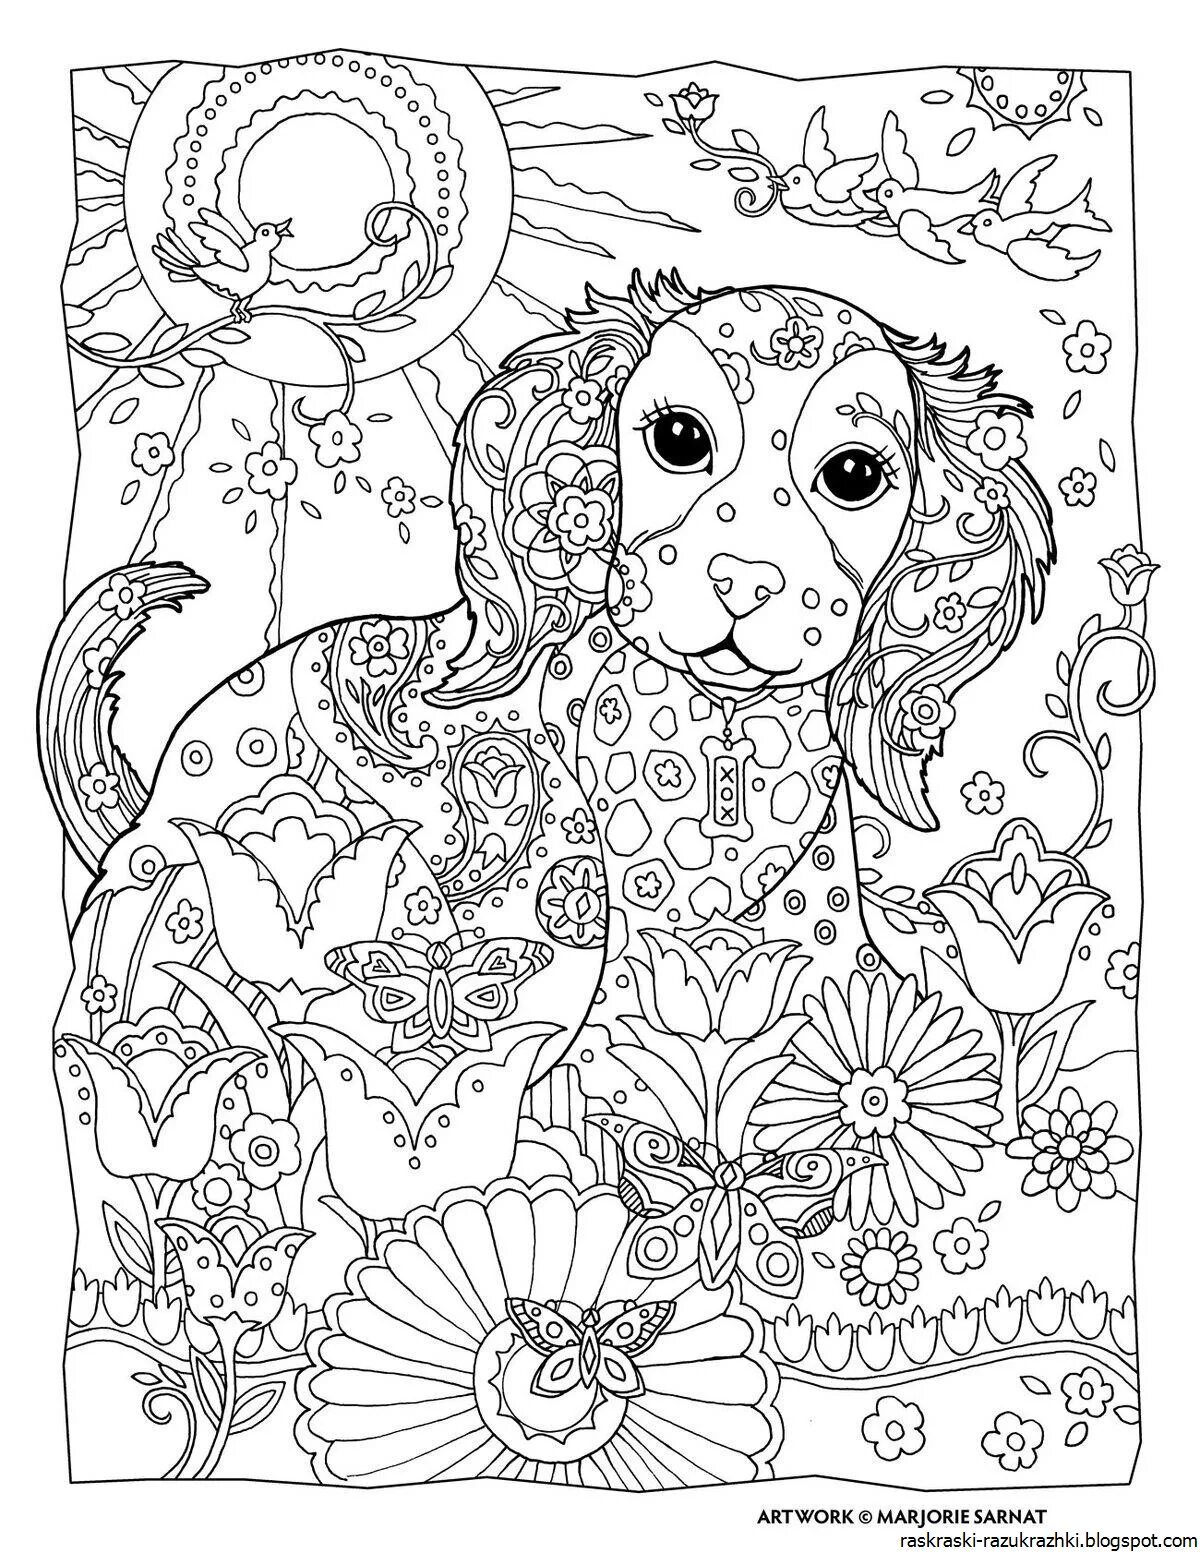 Colorful psychological coloring book for inquisitive students